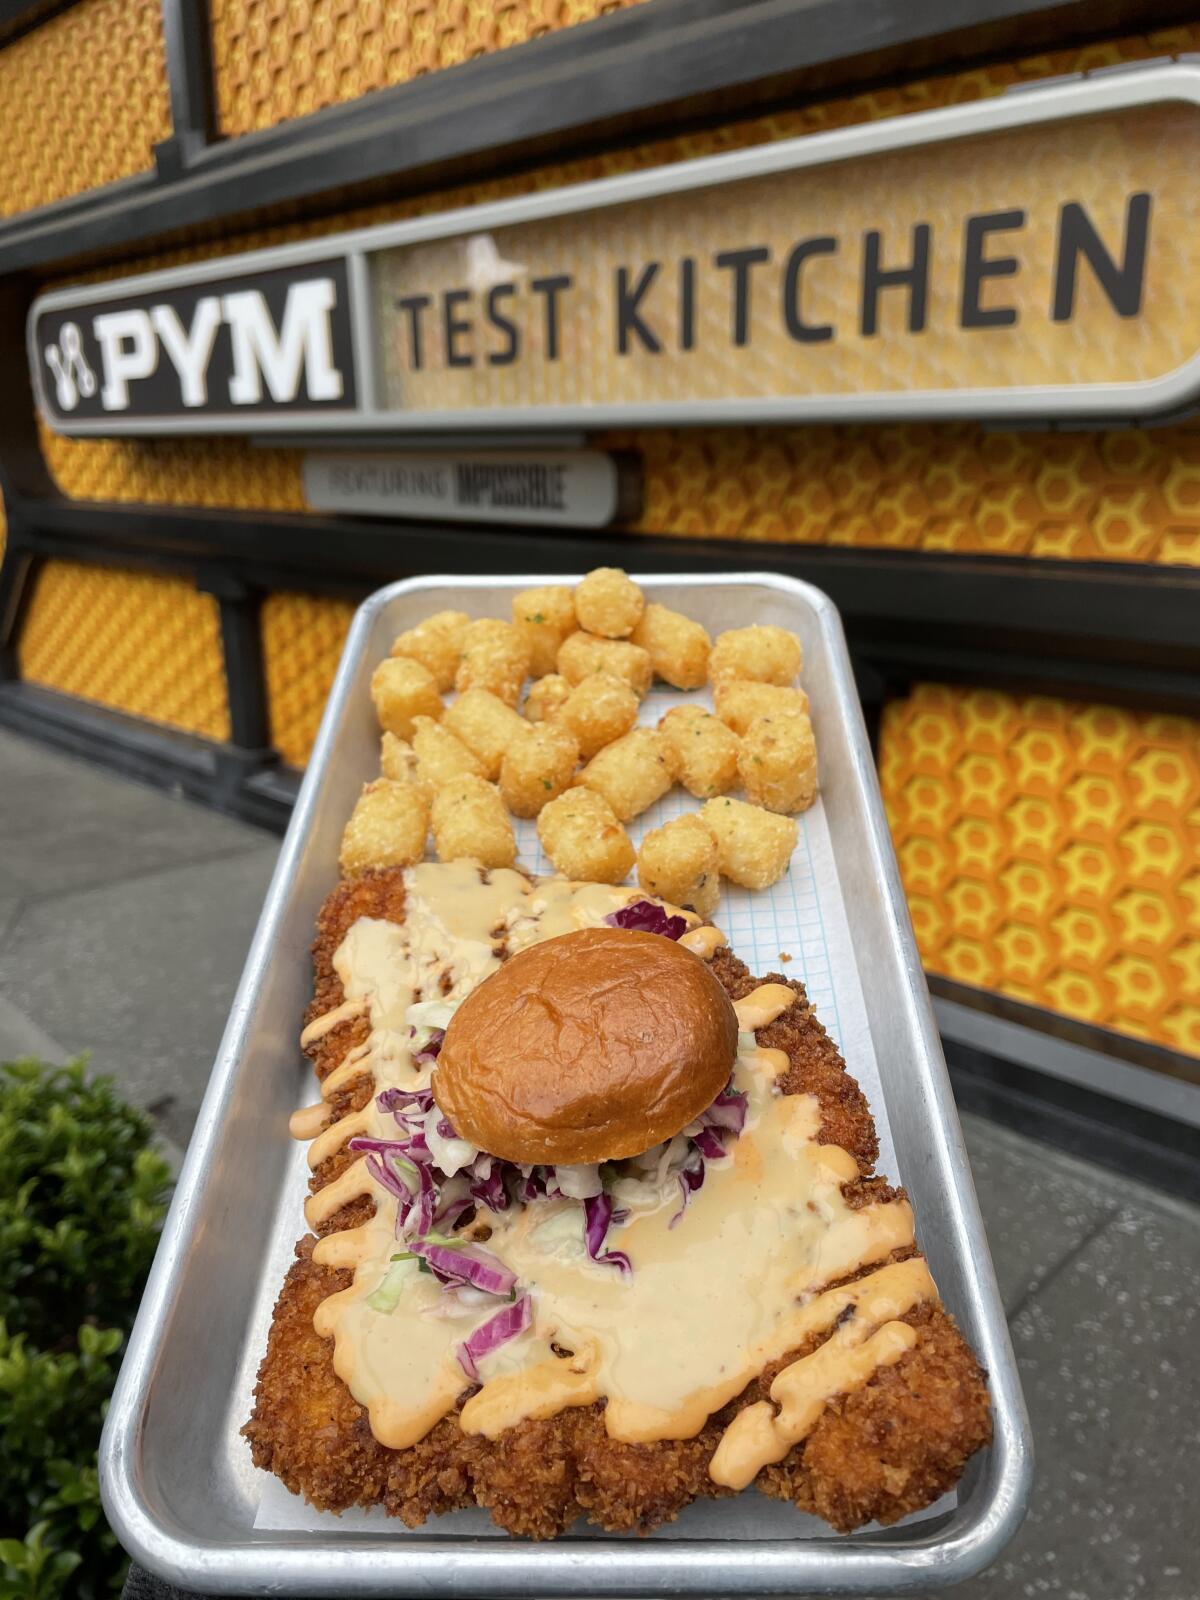 The “Not so Little Chicken Sandwich” from Pym Test Kitchen isn’t just a gimmick; it’s a great value at $15.49.